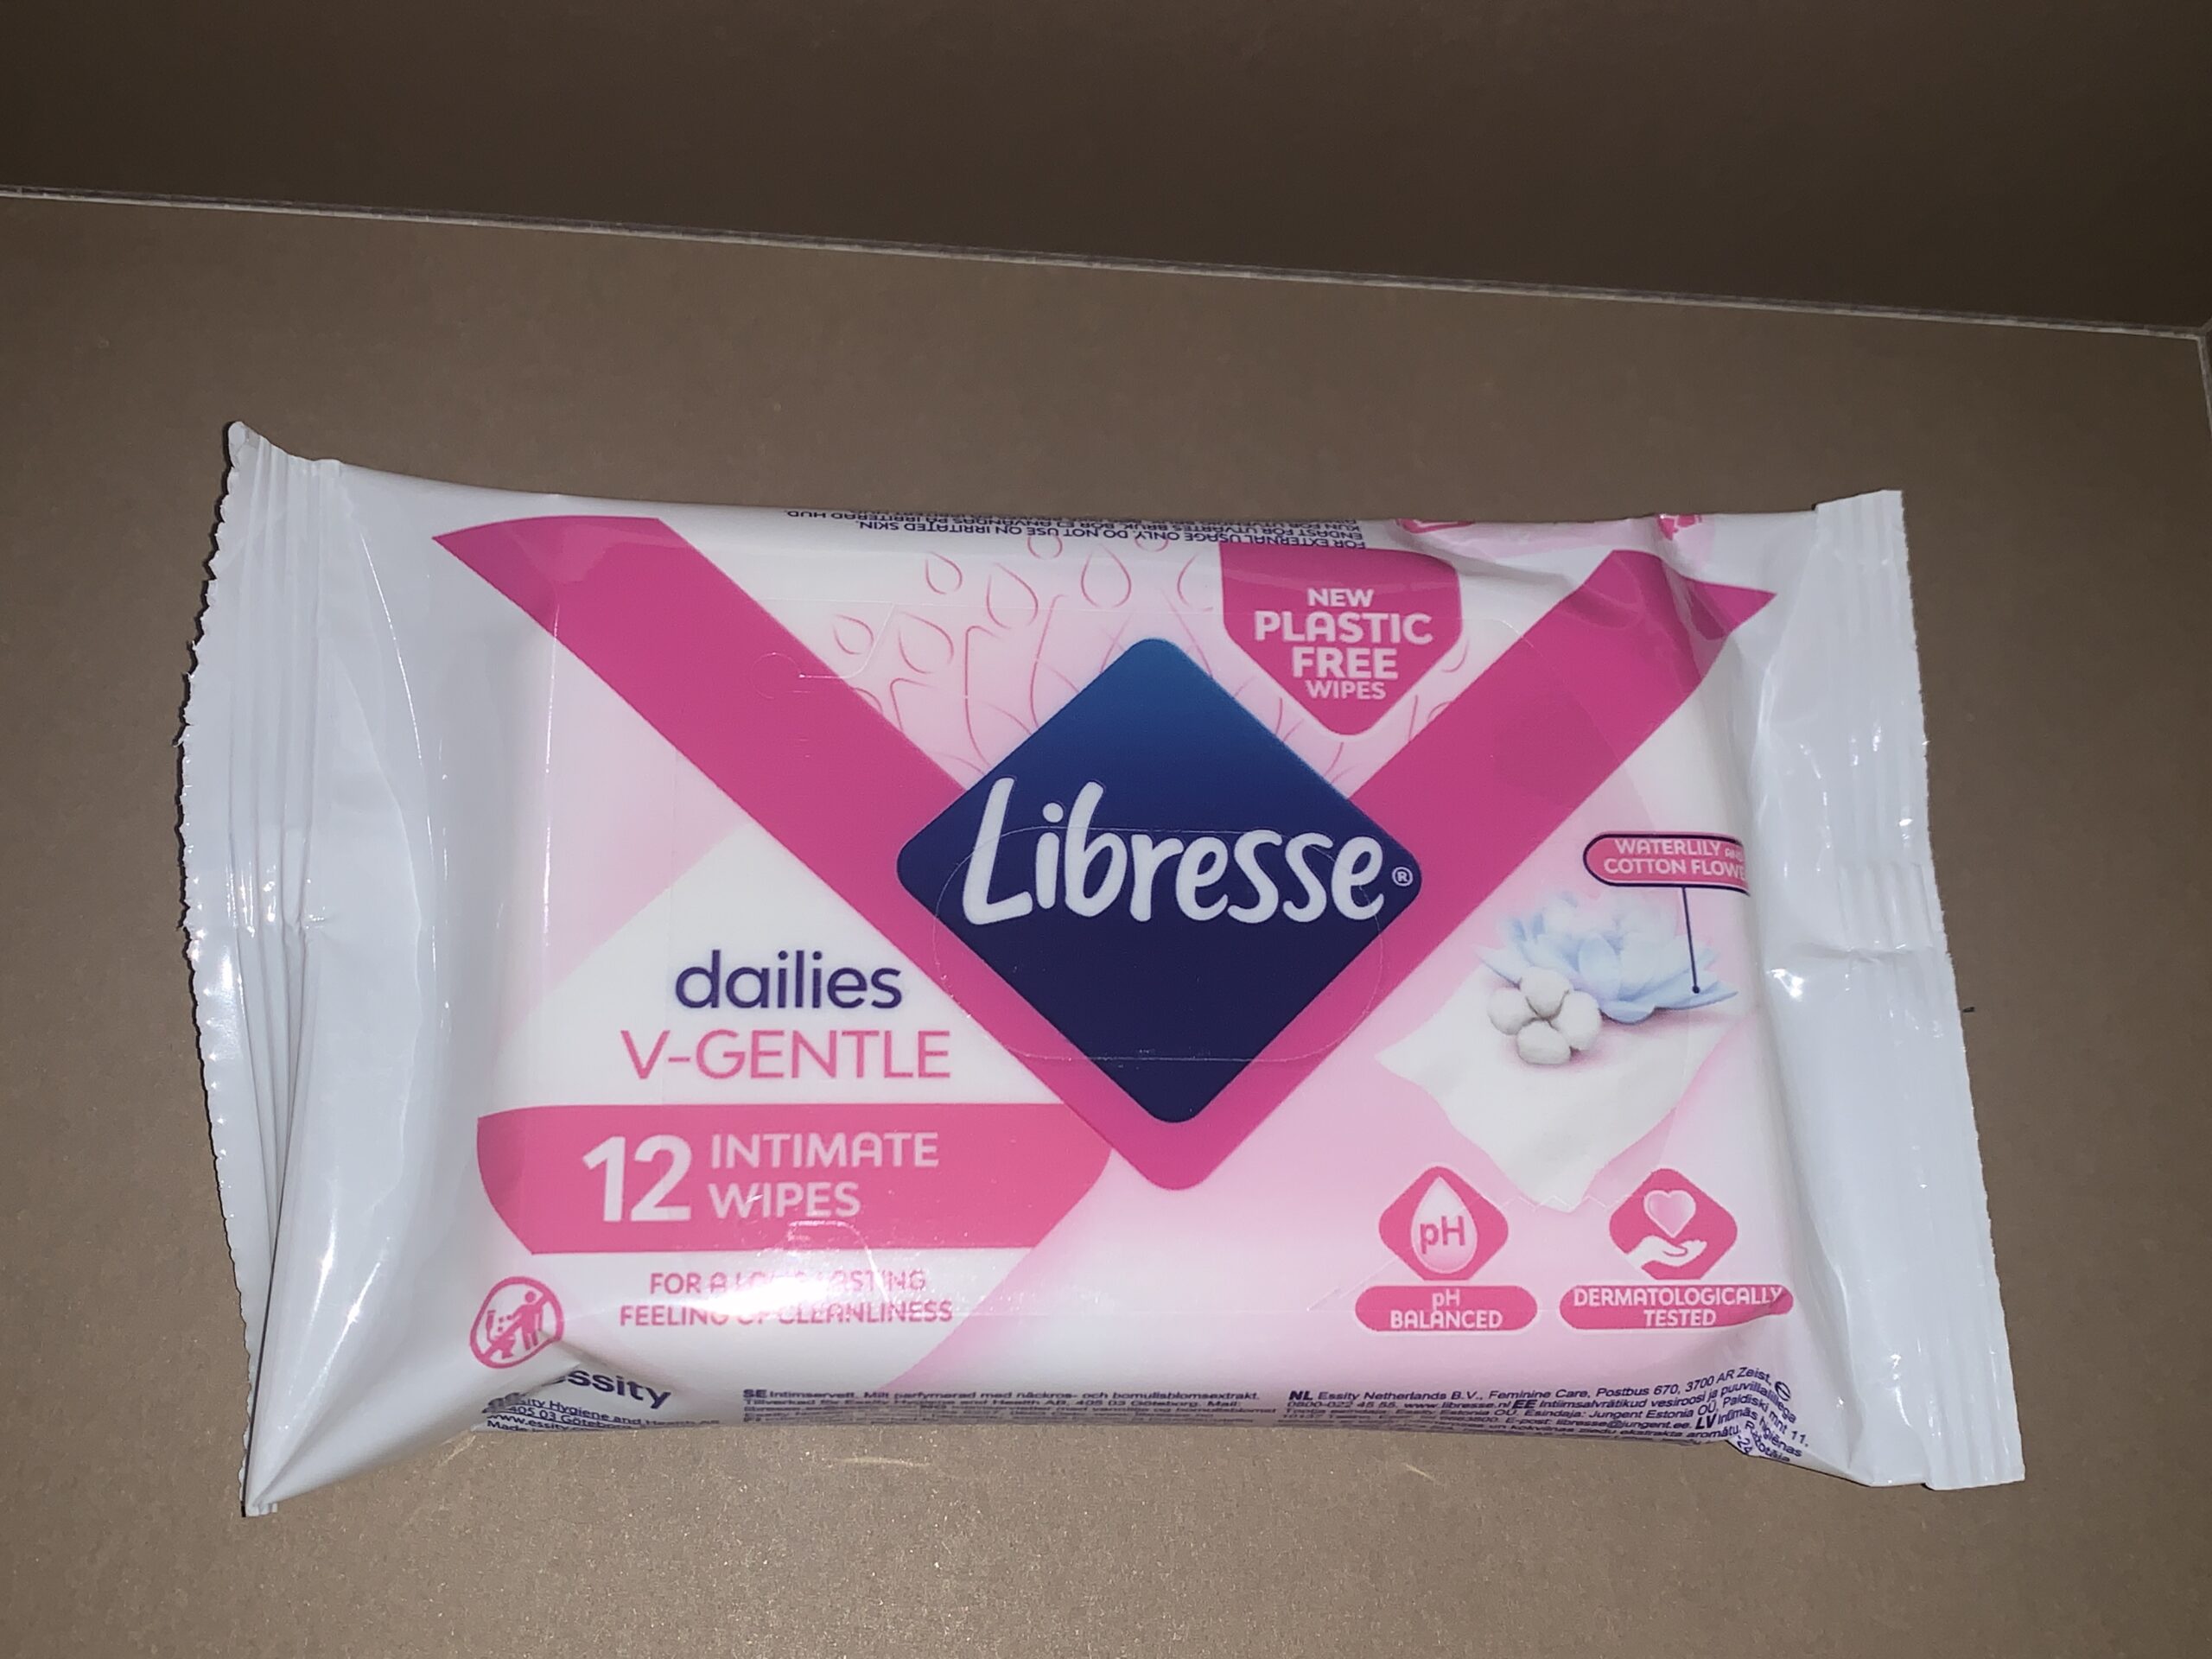 Libresse dailies v-gentle intimate vipes